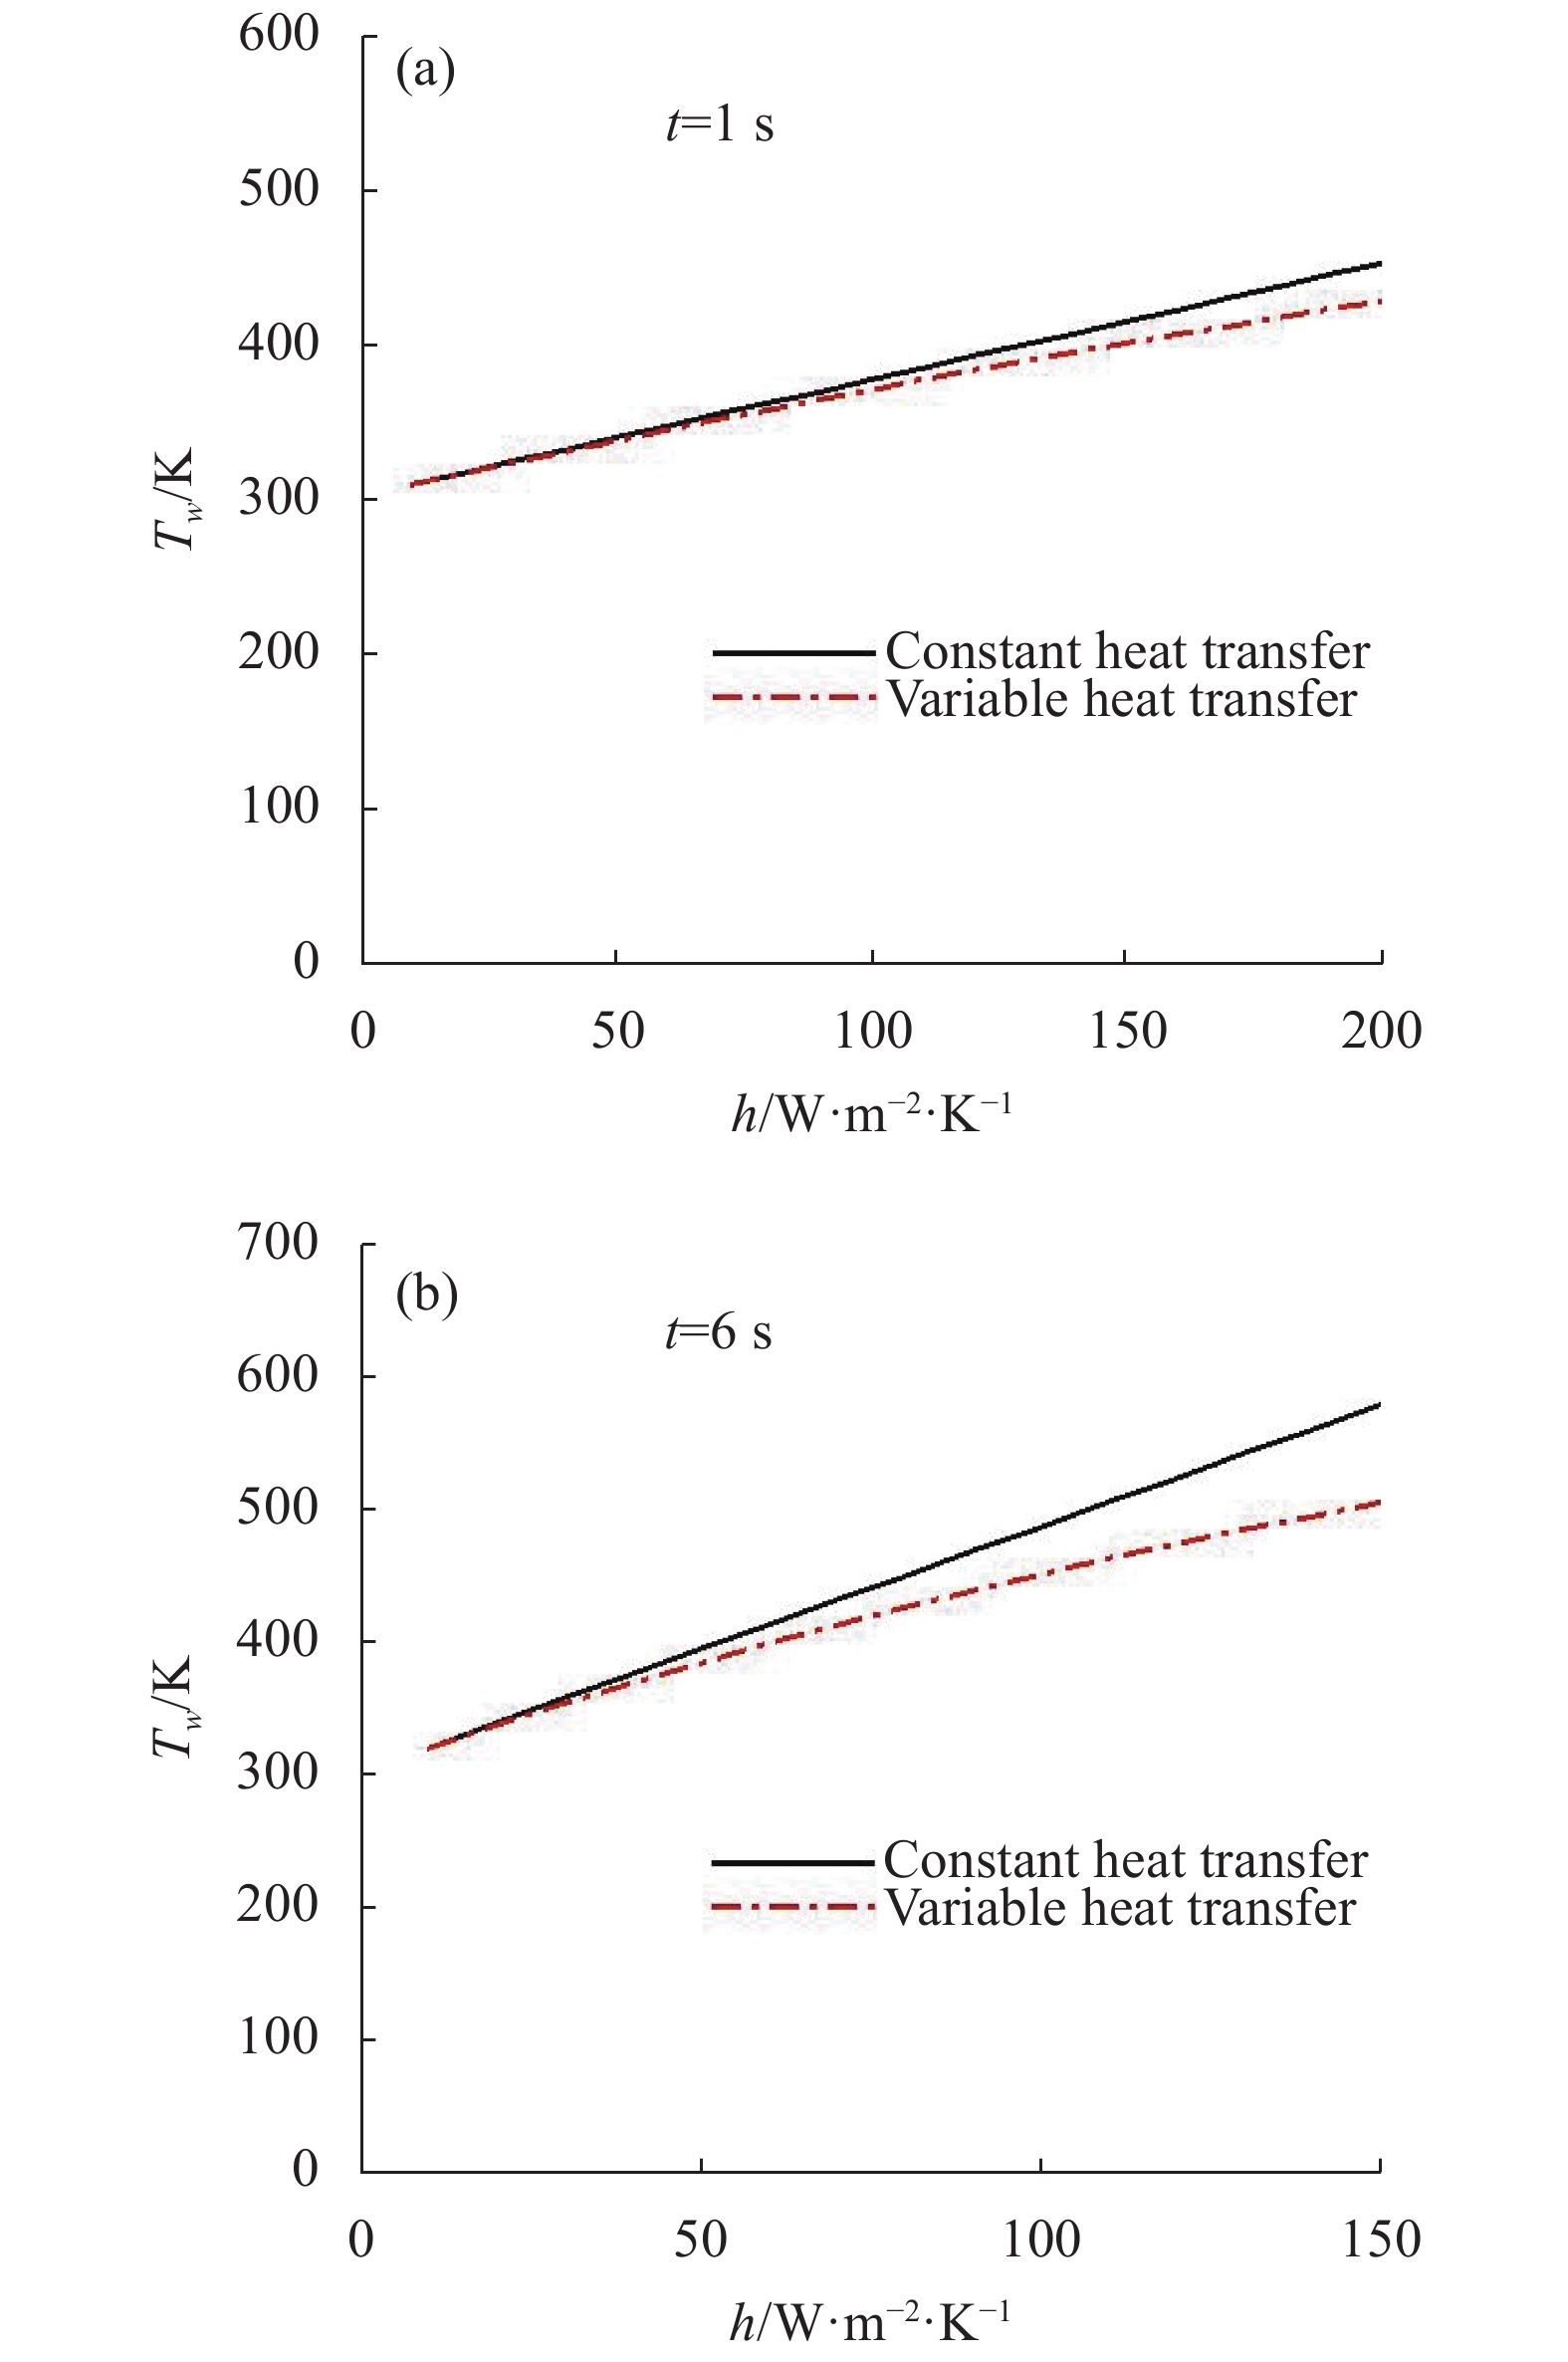 Variation of model surface temperature at different heating time. (a) t=1 s; (b) t=6 s